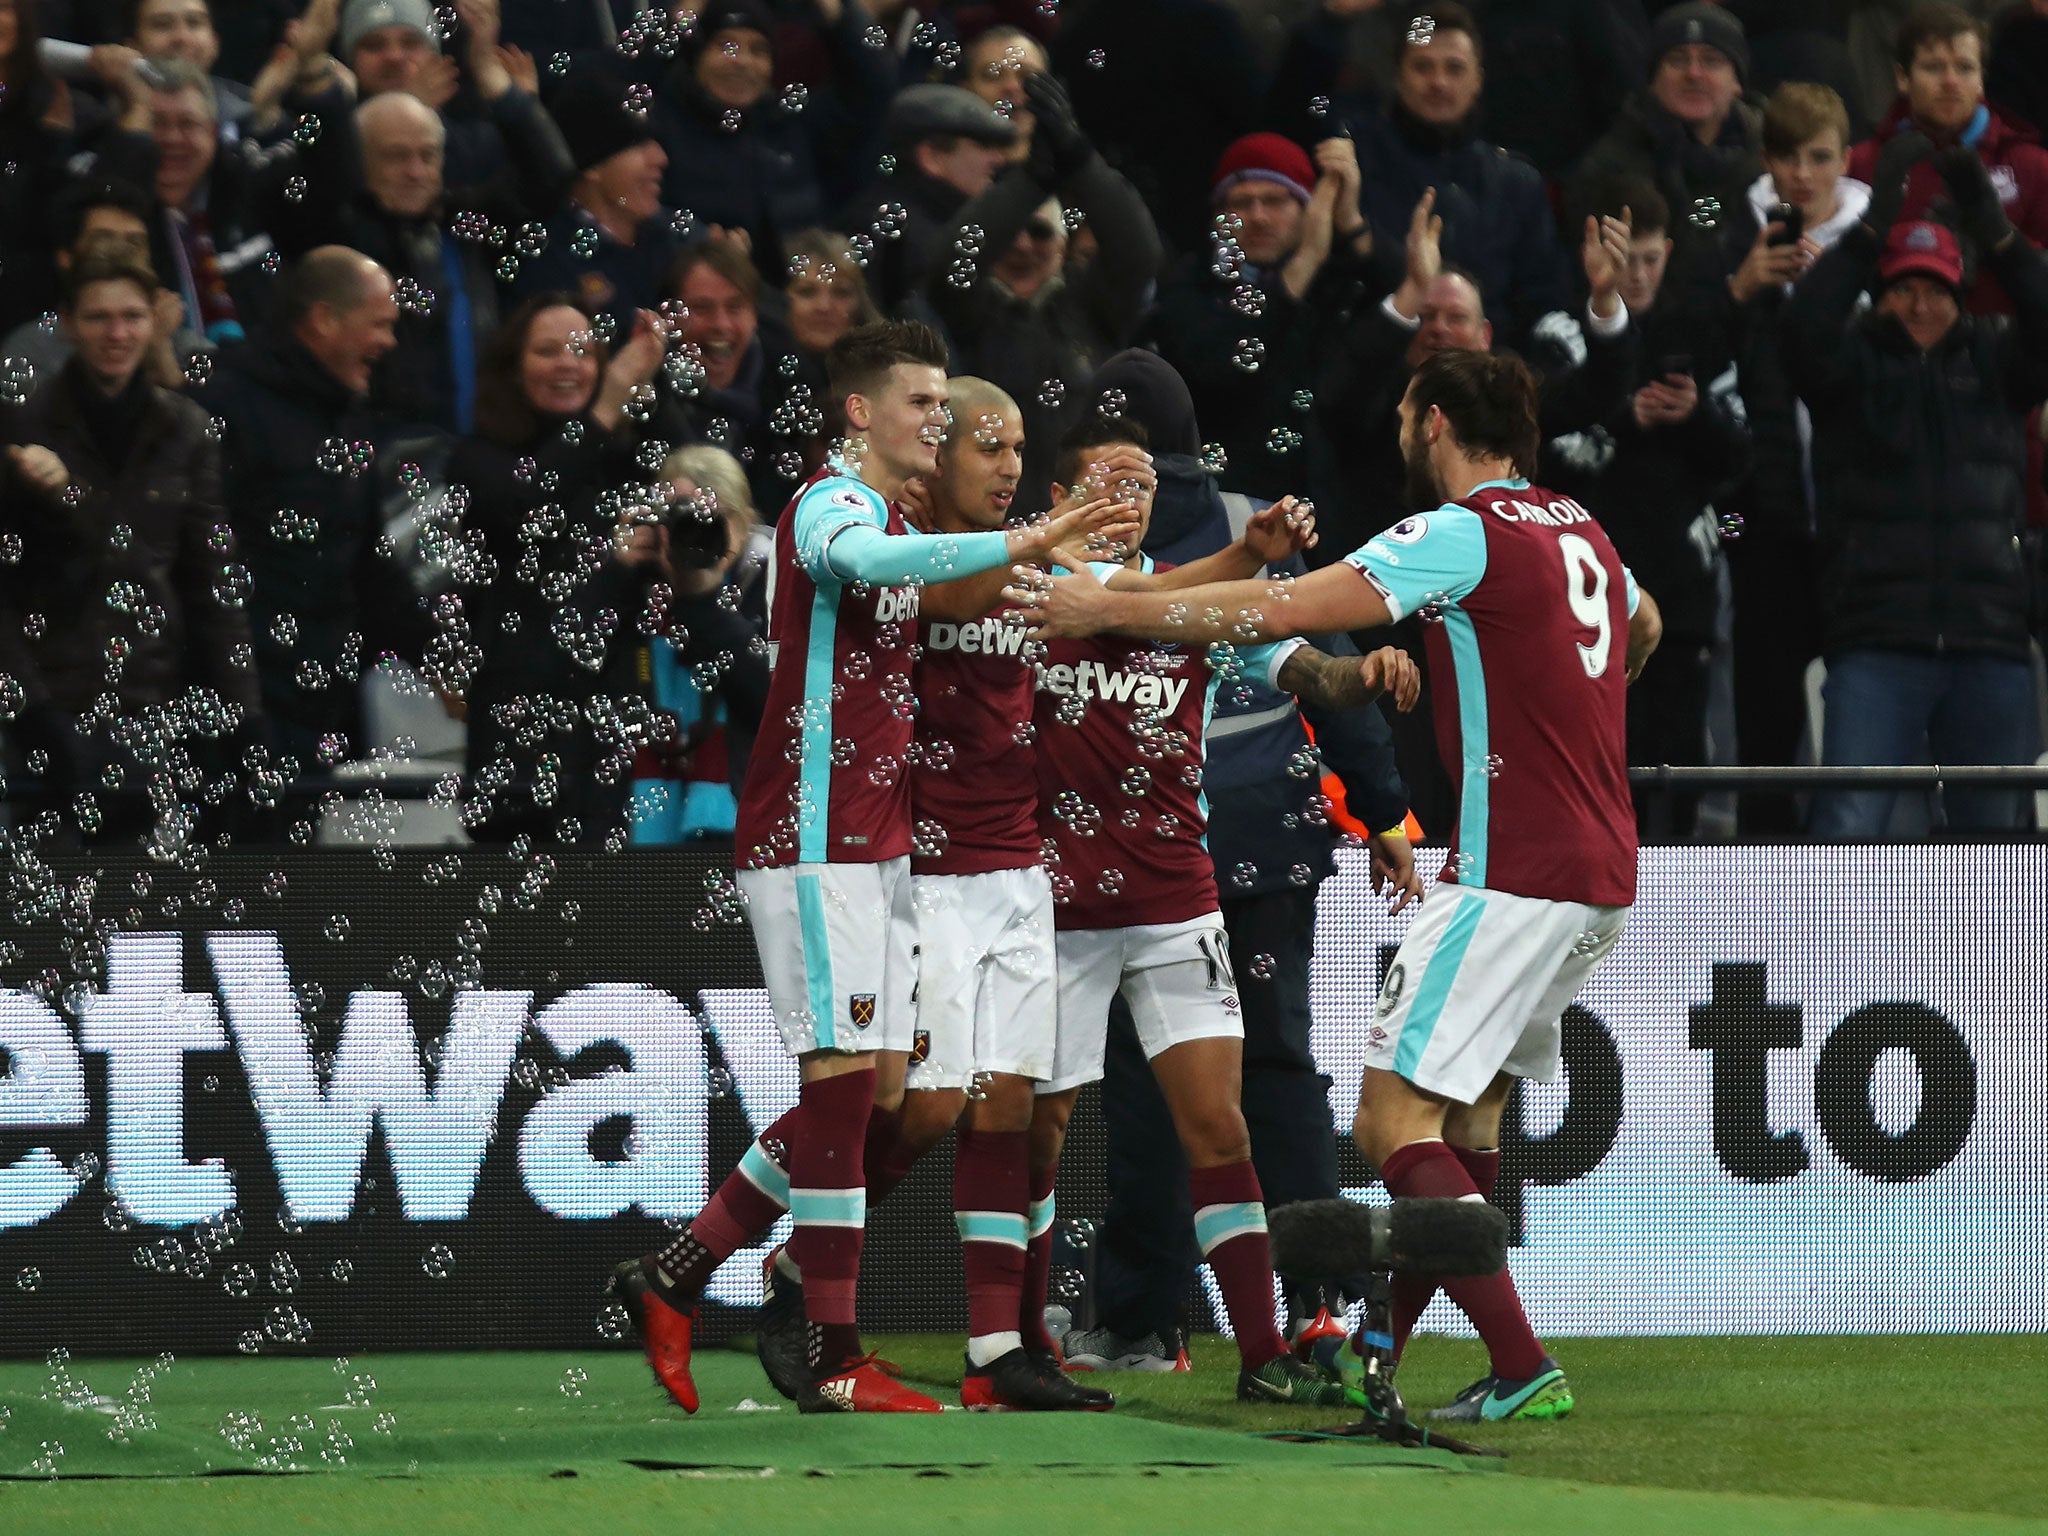 Feghouli celebrates with his team mates after scoring the side's second